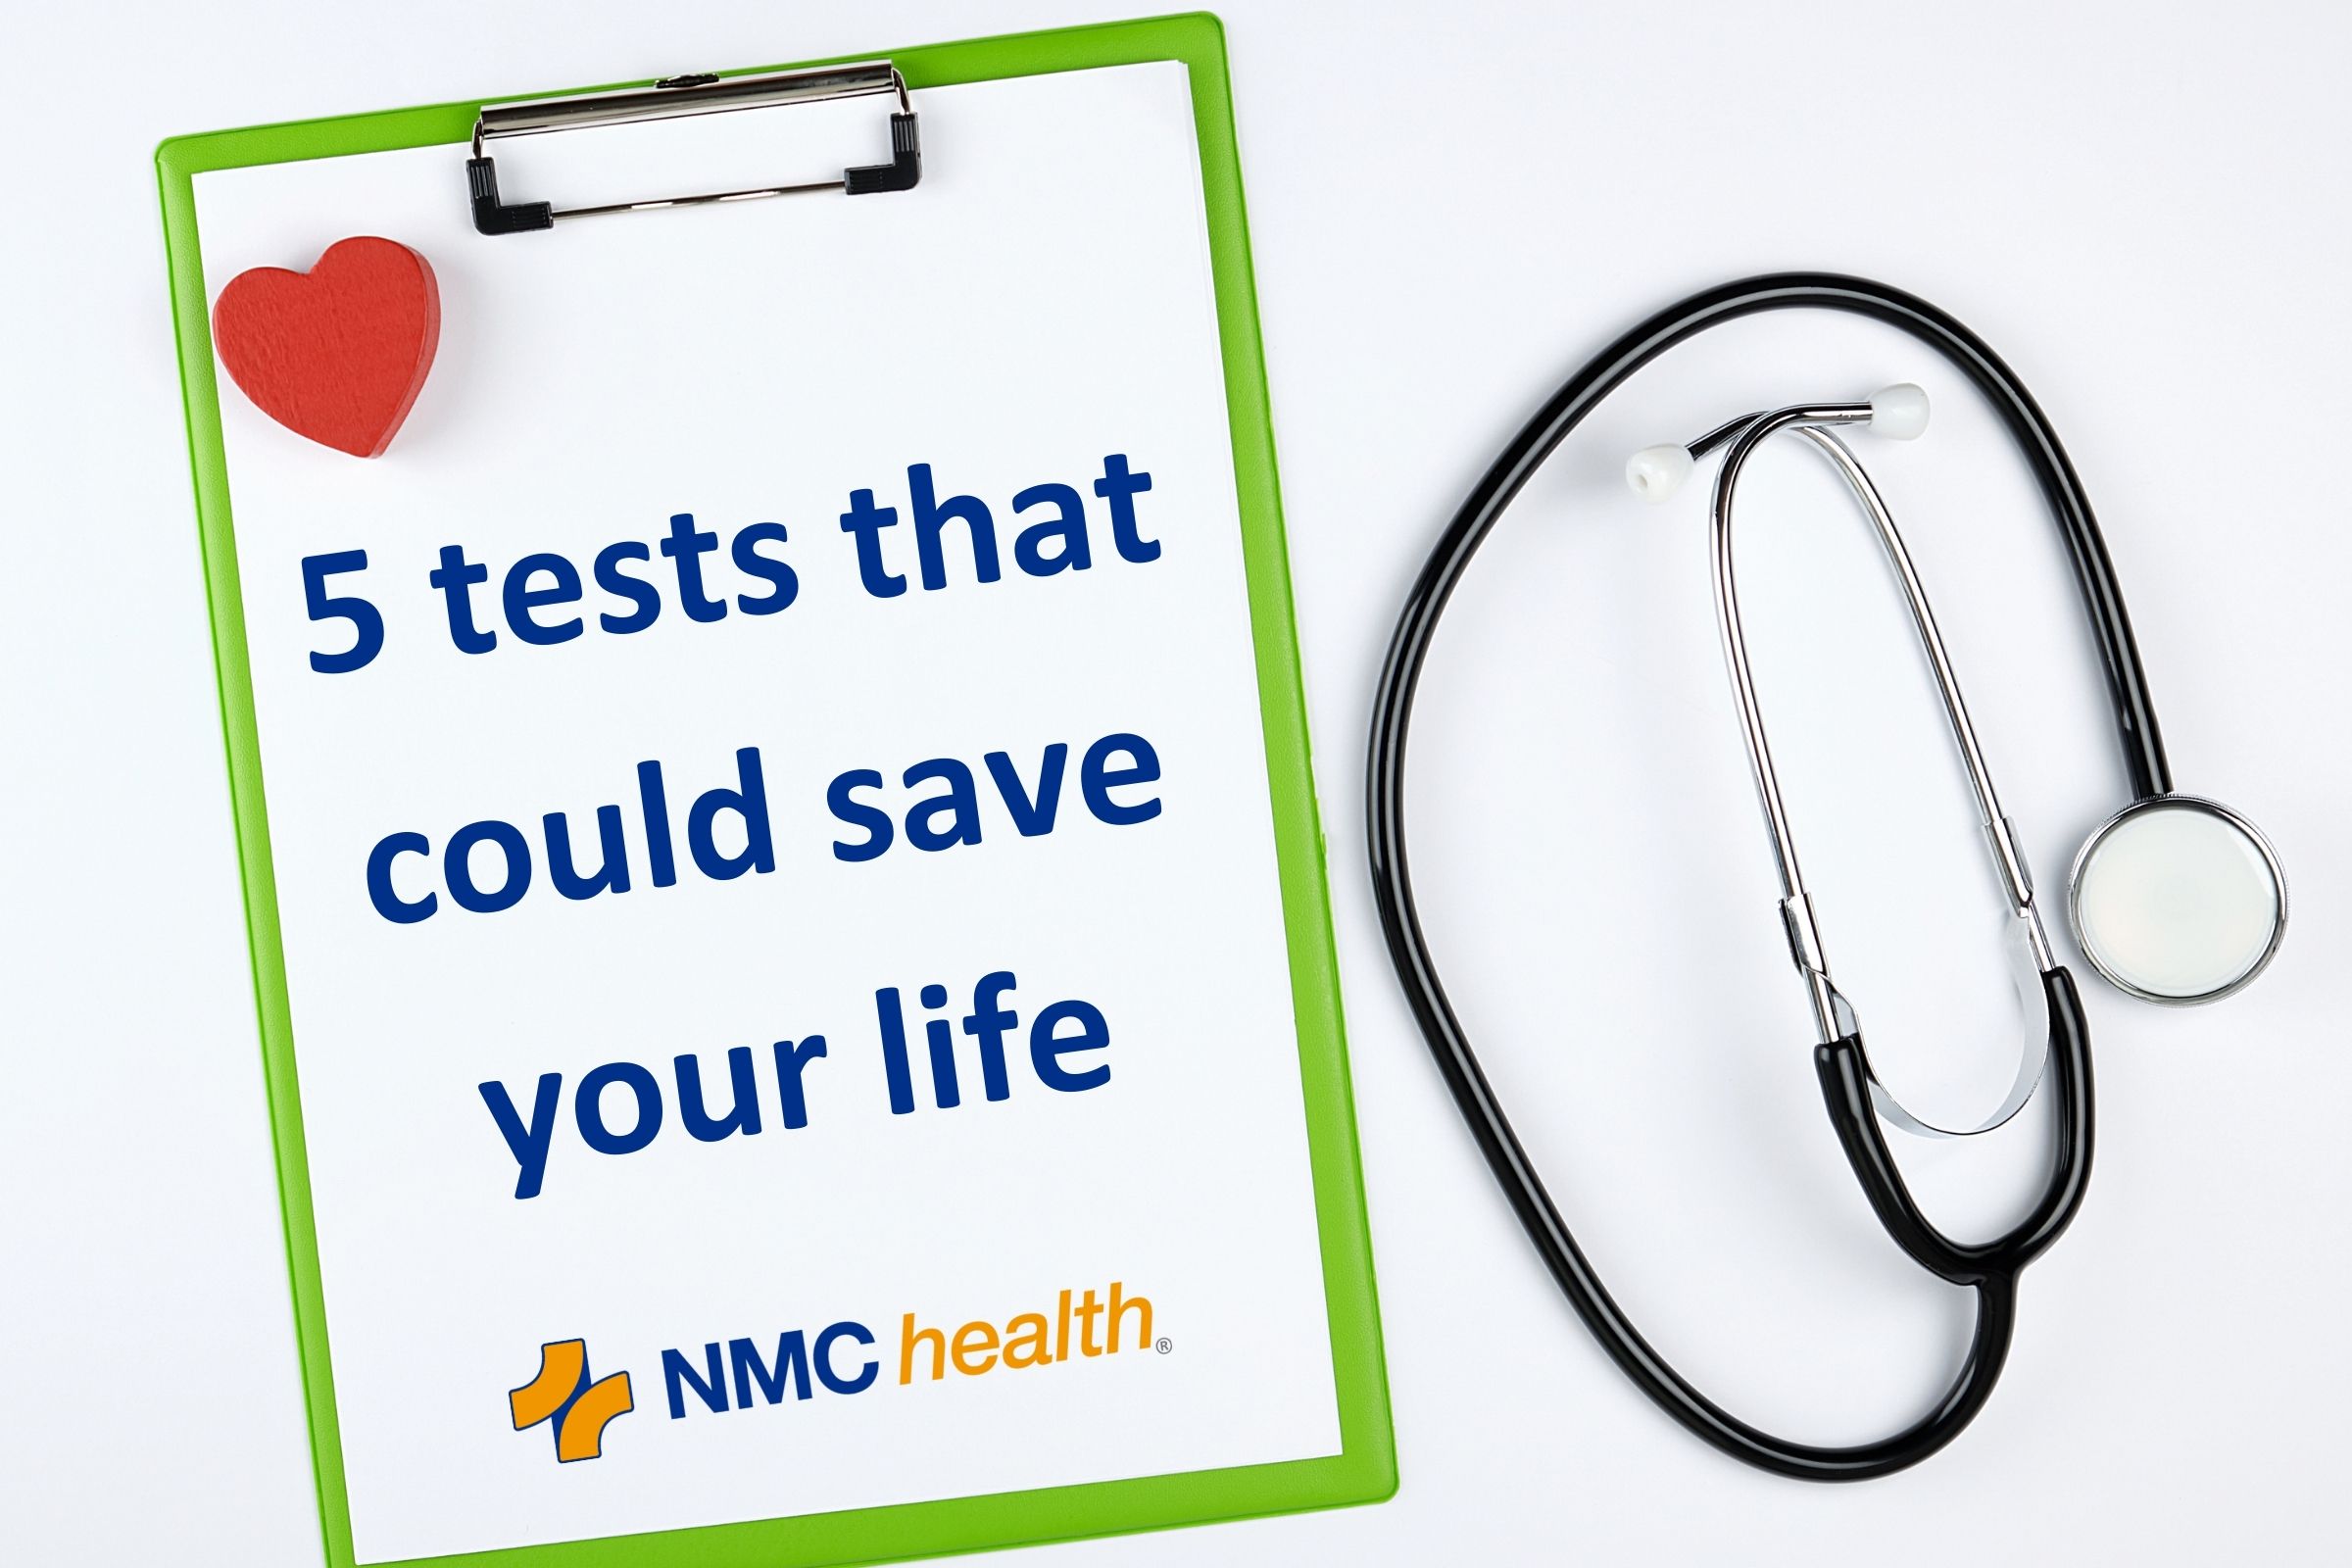 header image for 5 tests that could save your life: colonoscopy, dexa bone density scan, mammogram, ct cardiac calcium scoring heart ct scan screening and psa lab